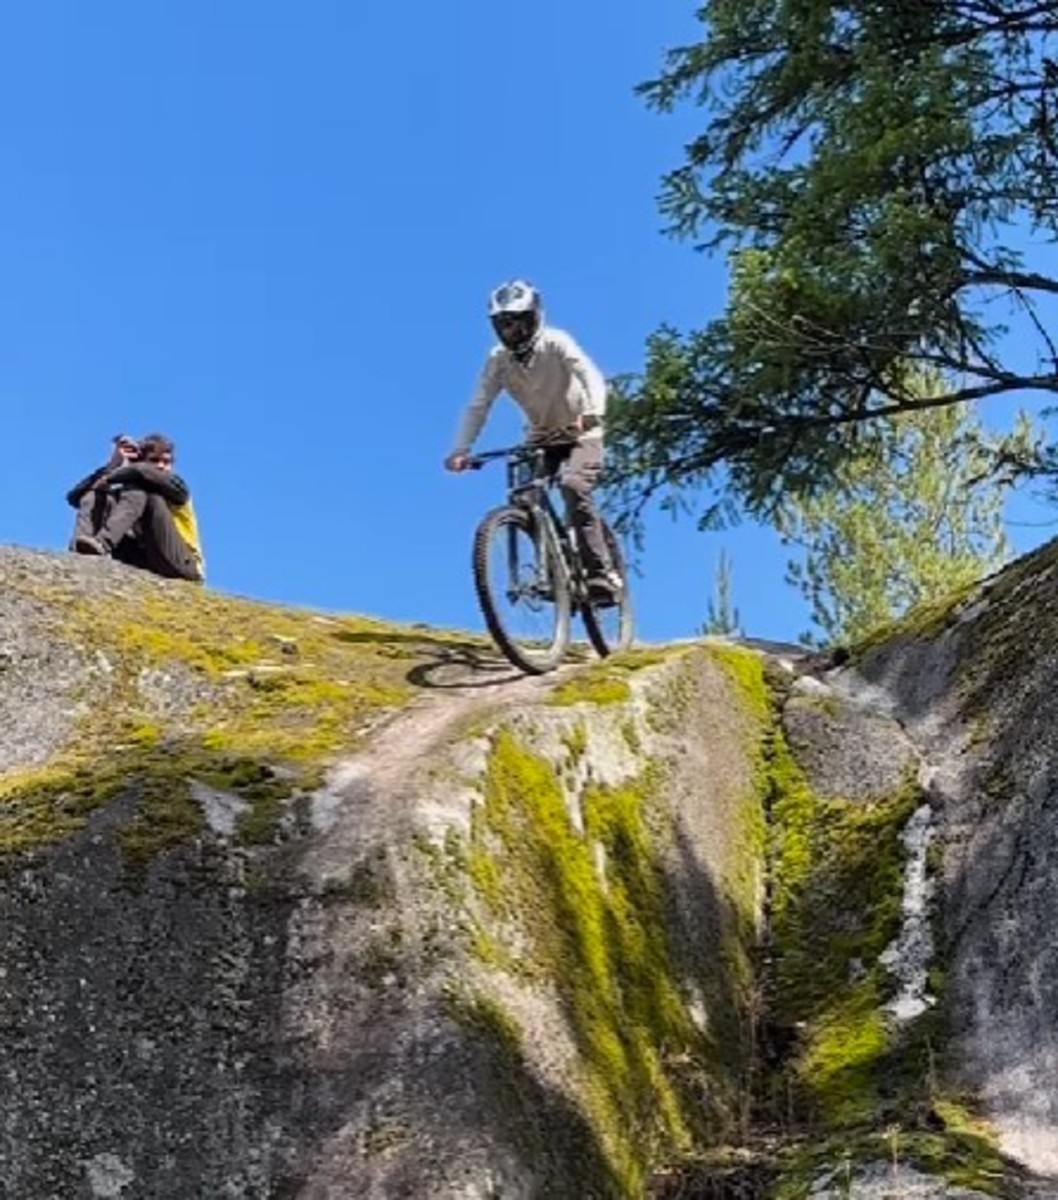 These Are The World's Greatest Ever Mountain Biking Memes in 2023